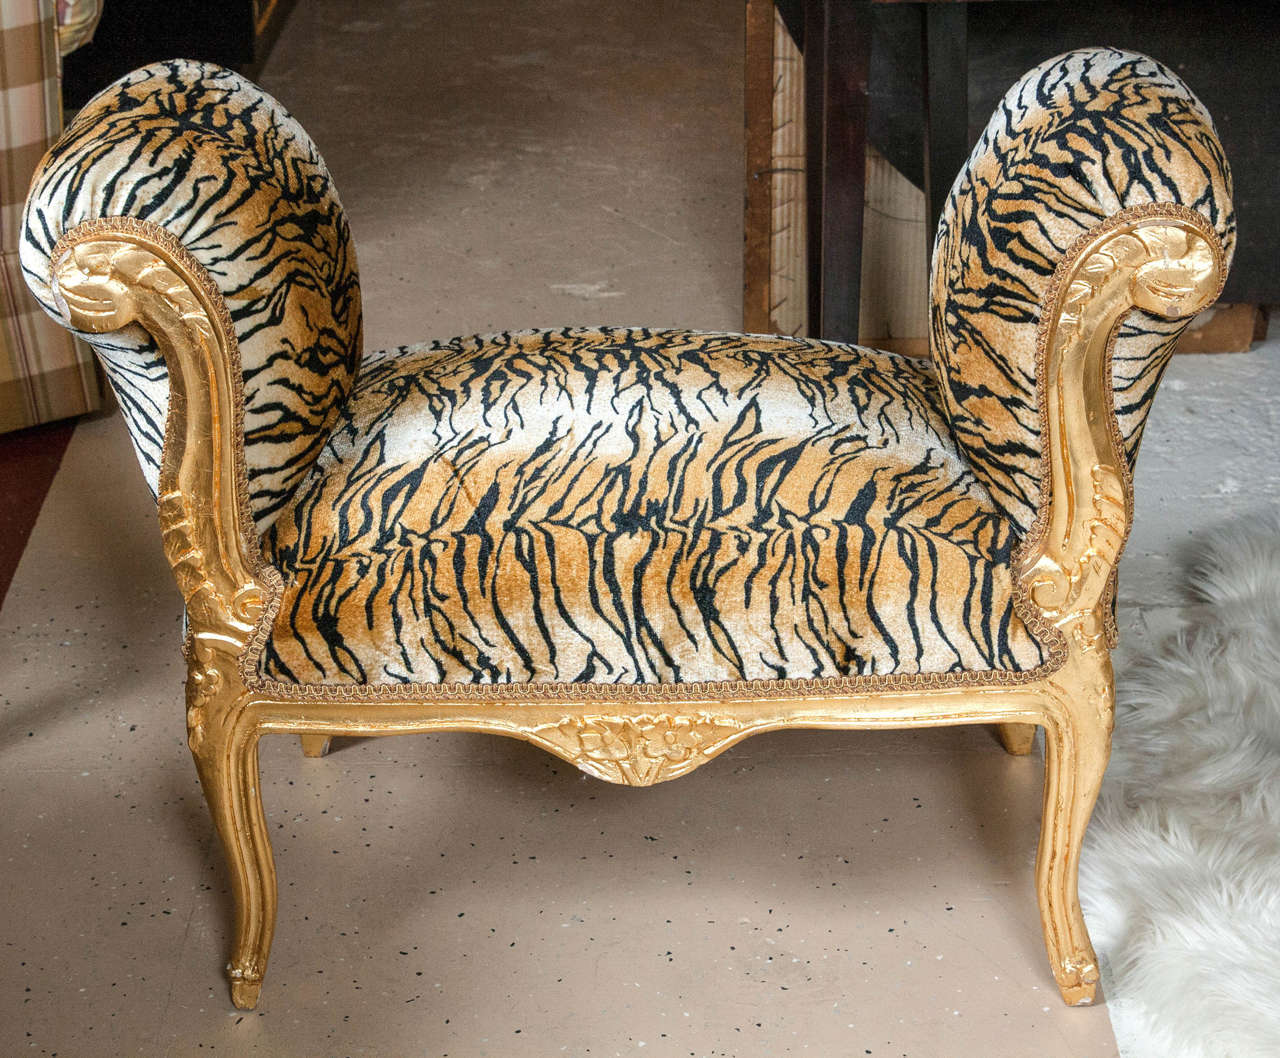 Chanel style faux tiger furred gilt bench. Exotic and fun this is sure to inspire conversation. The gilt wood has carved scrolled detailed frames with a magnificent floral bouquet on the apron. Energetic and vibrant fabric - Great for a vanity bench